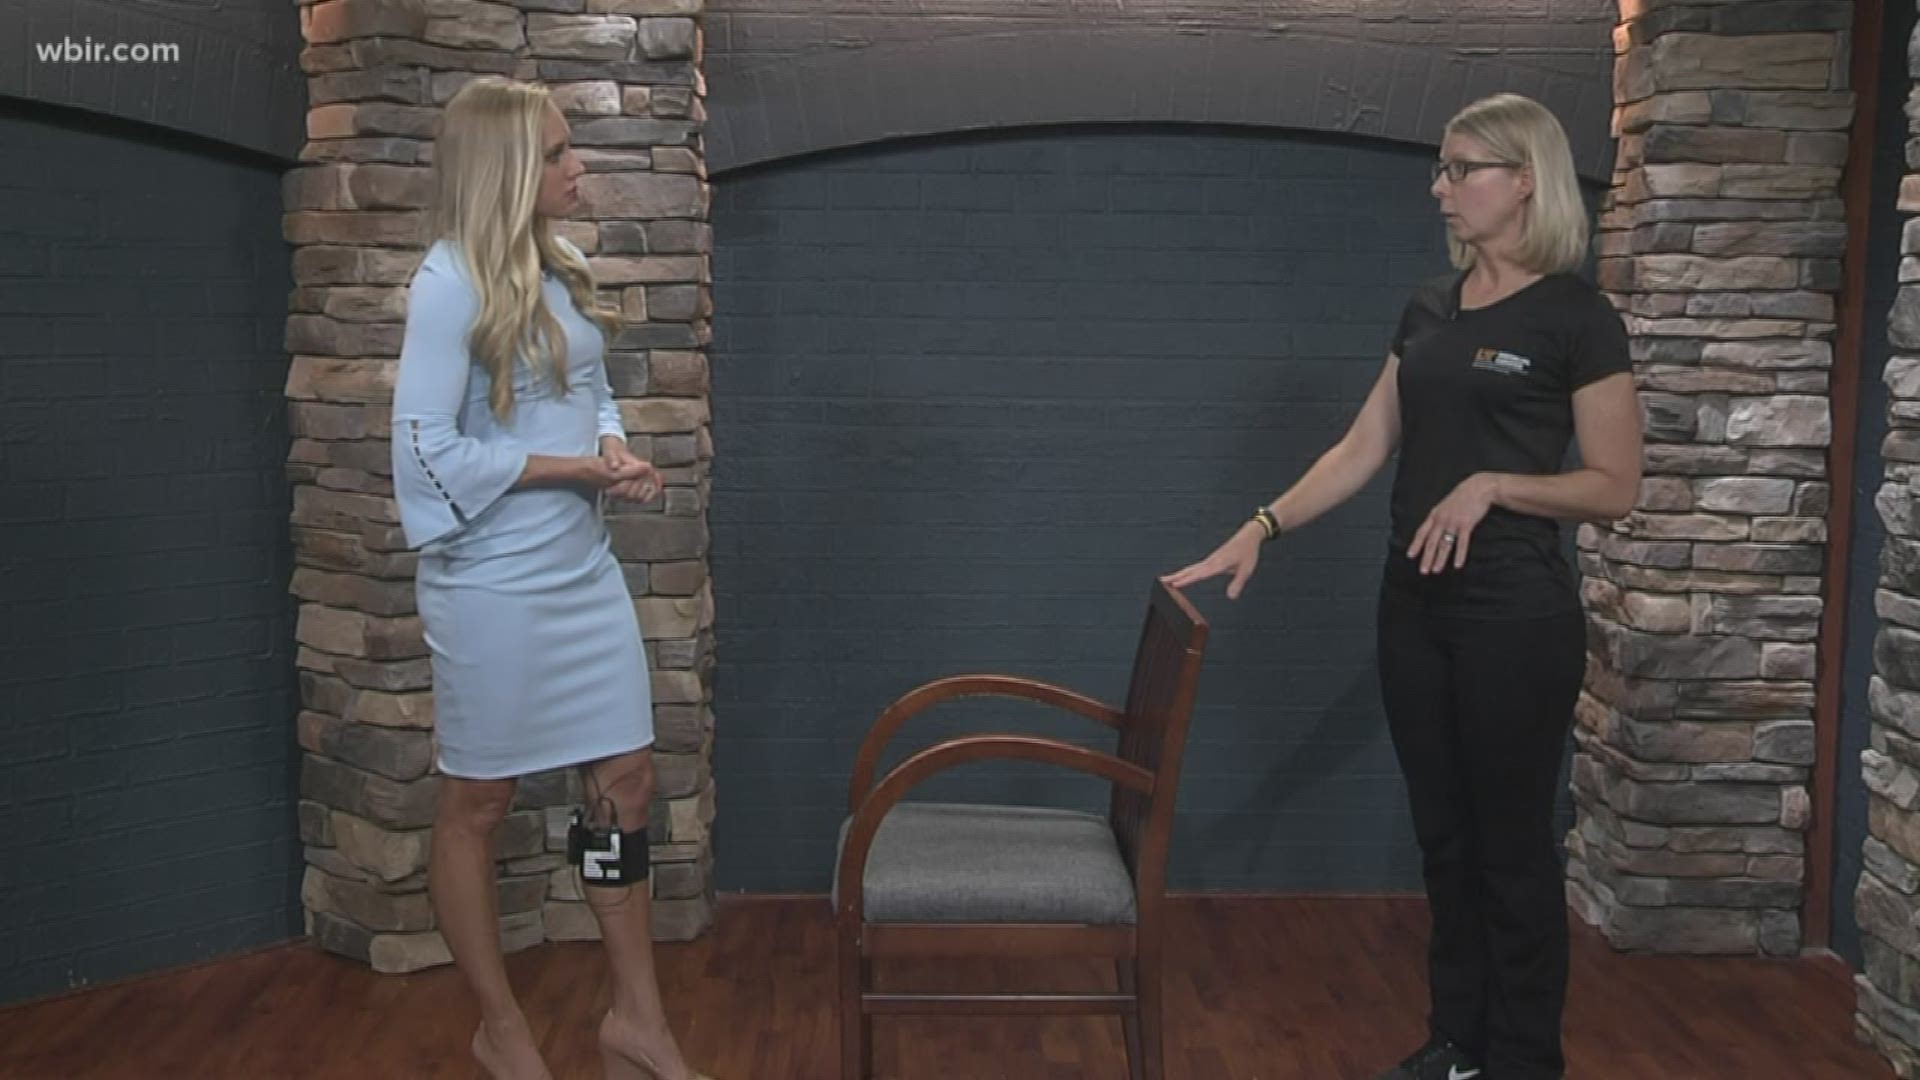 UT Medical Center Fitness Director Amy Shafer joins us with five simple exercises seniors can do to maintain their bodies.